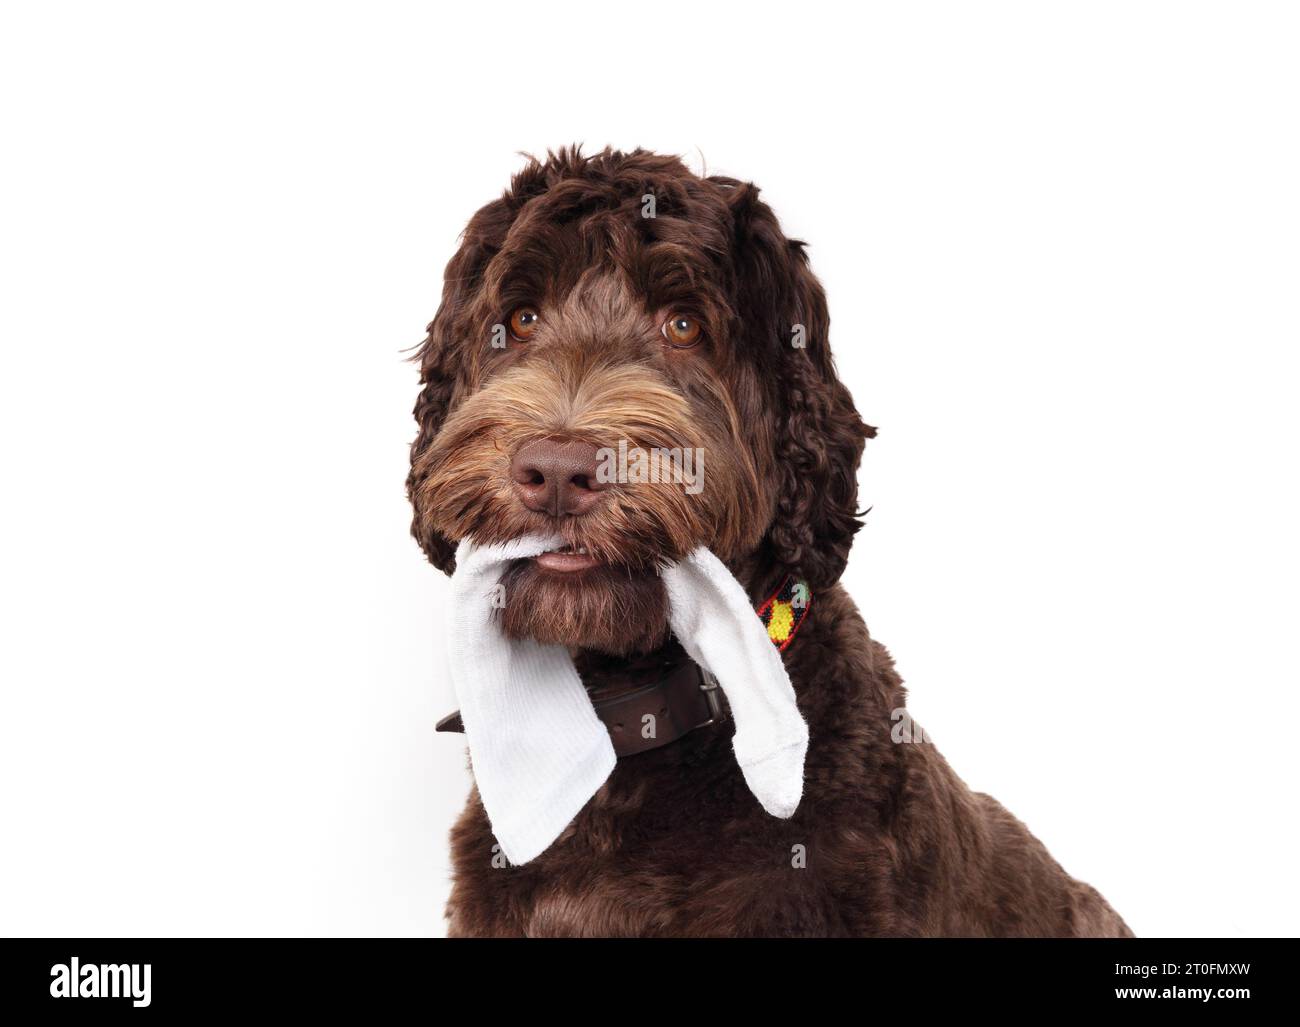 Cute dog with sock in mouth and looking at camera. Fluffy puppy dog chewing or stealing clothing with playful expression. 1 year old female Labradoodl Stock Photo